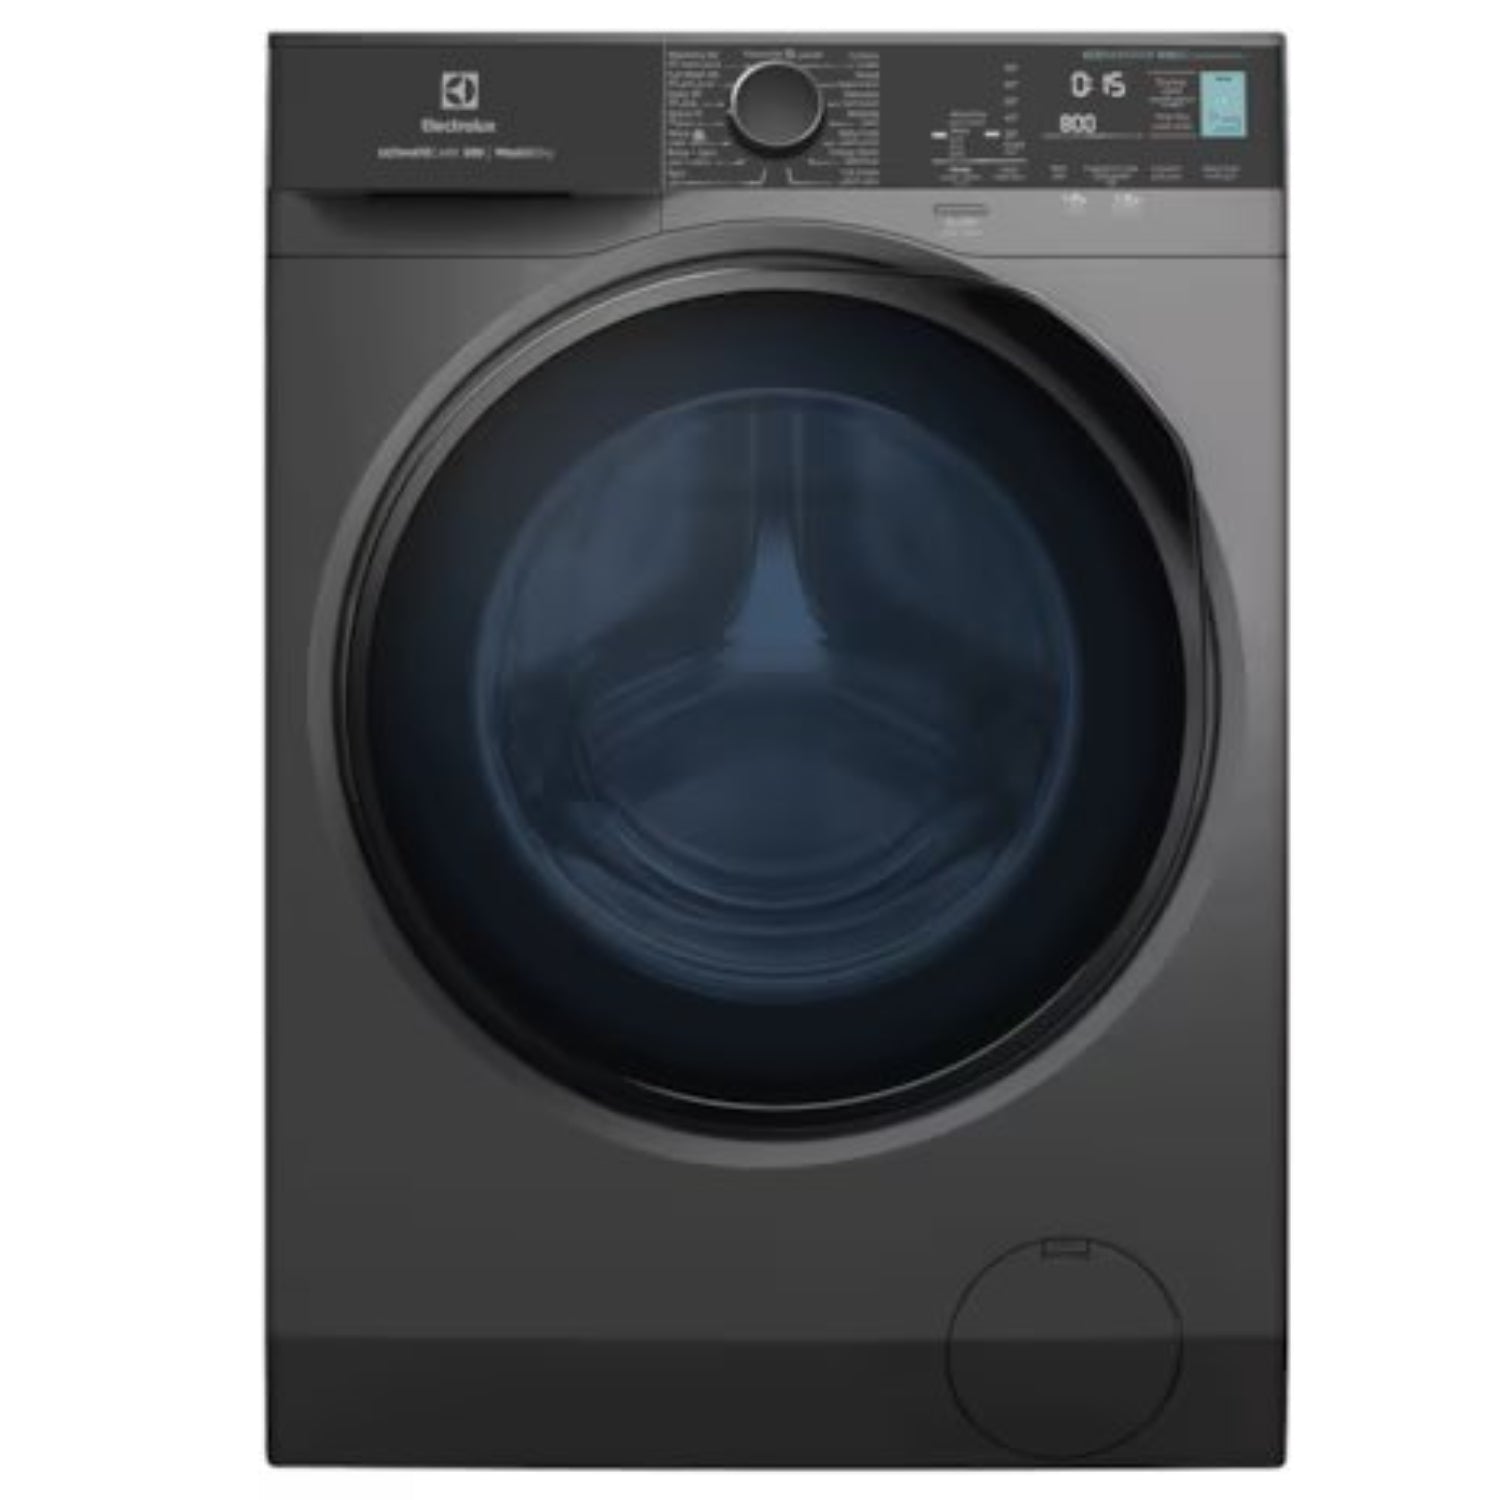 Electrolux 9kg/6kg Washer Dryer Combo with HygienicCare, EcoInverter Motor, Onyx Dark Silver